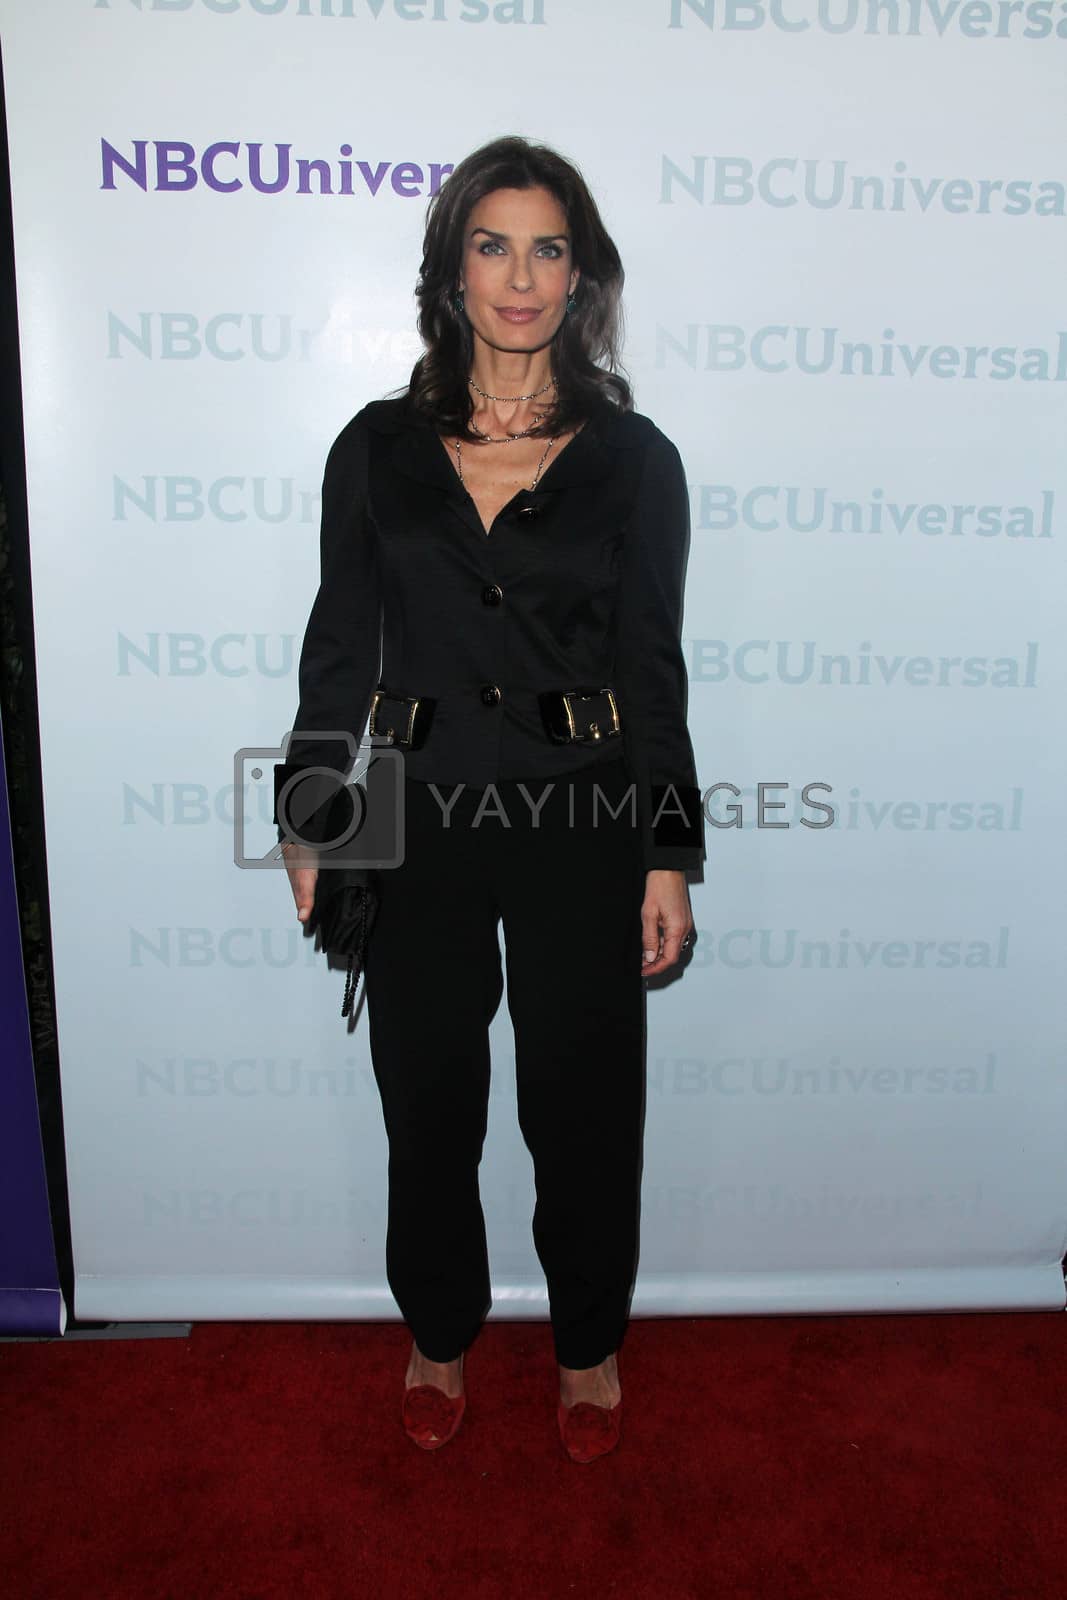 Royalty free image of Kristian Alfonso at the NBCUNIVERSAL Press Tour All-Star Party, The Athenaeum, Pasadena, CA 01-06-12/ImageCollect by ImageCollect